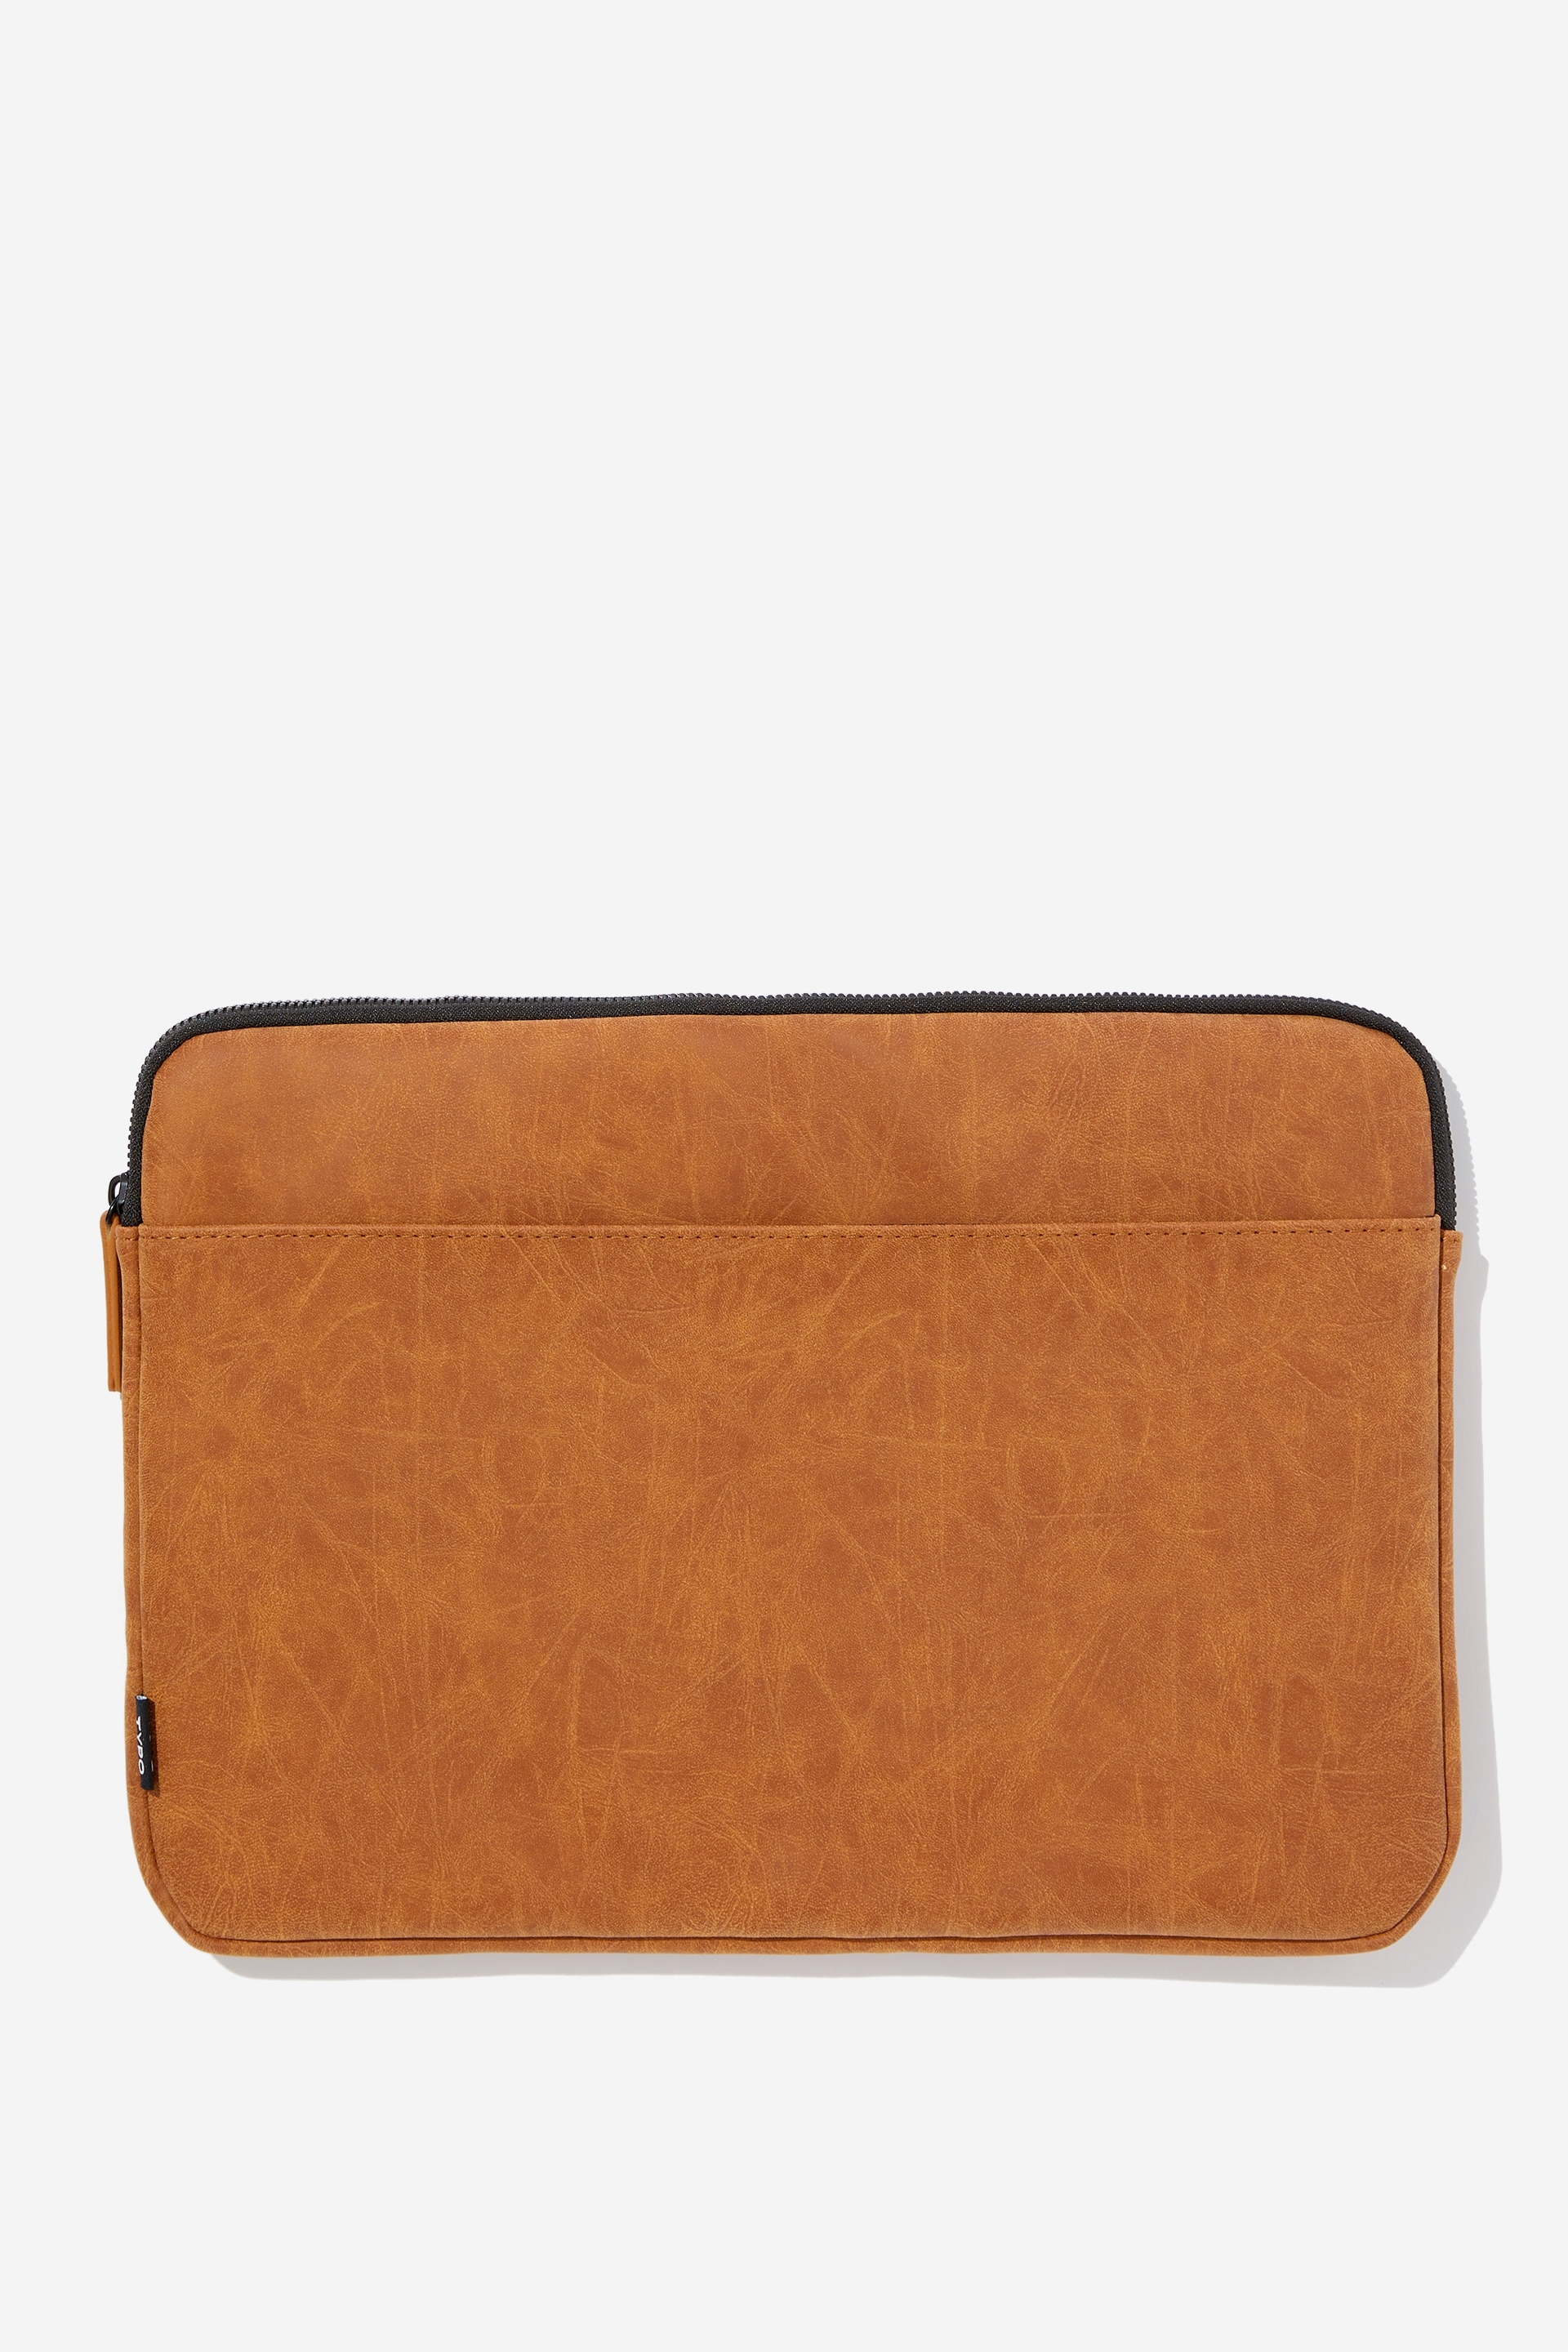 Typo - Core Laptop Cover 13 Inch - Mid tan